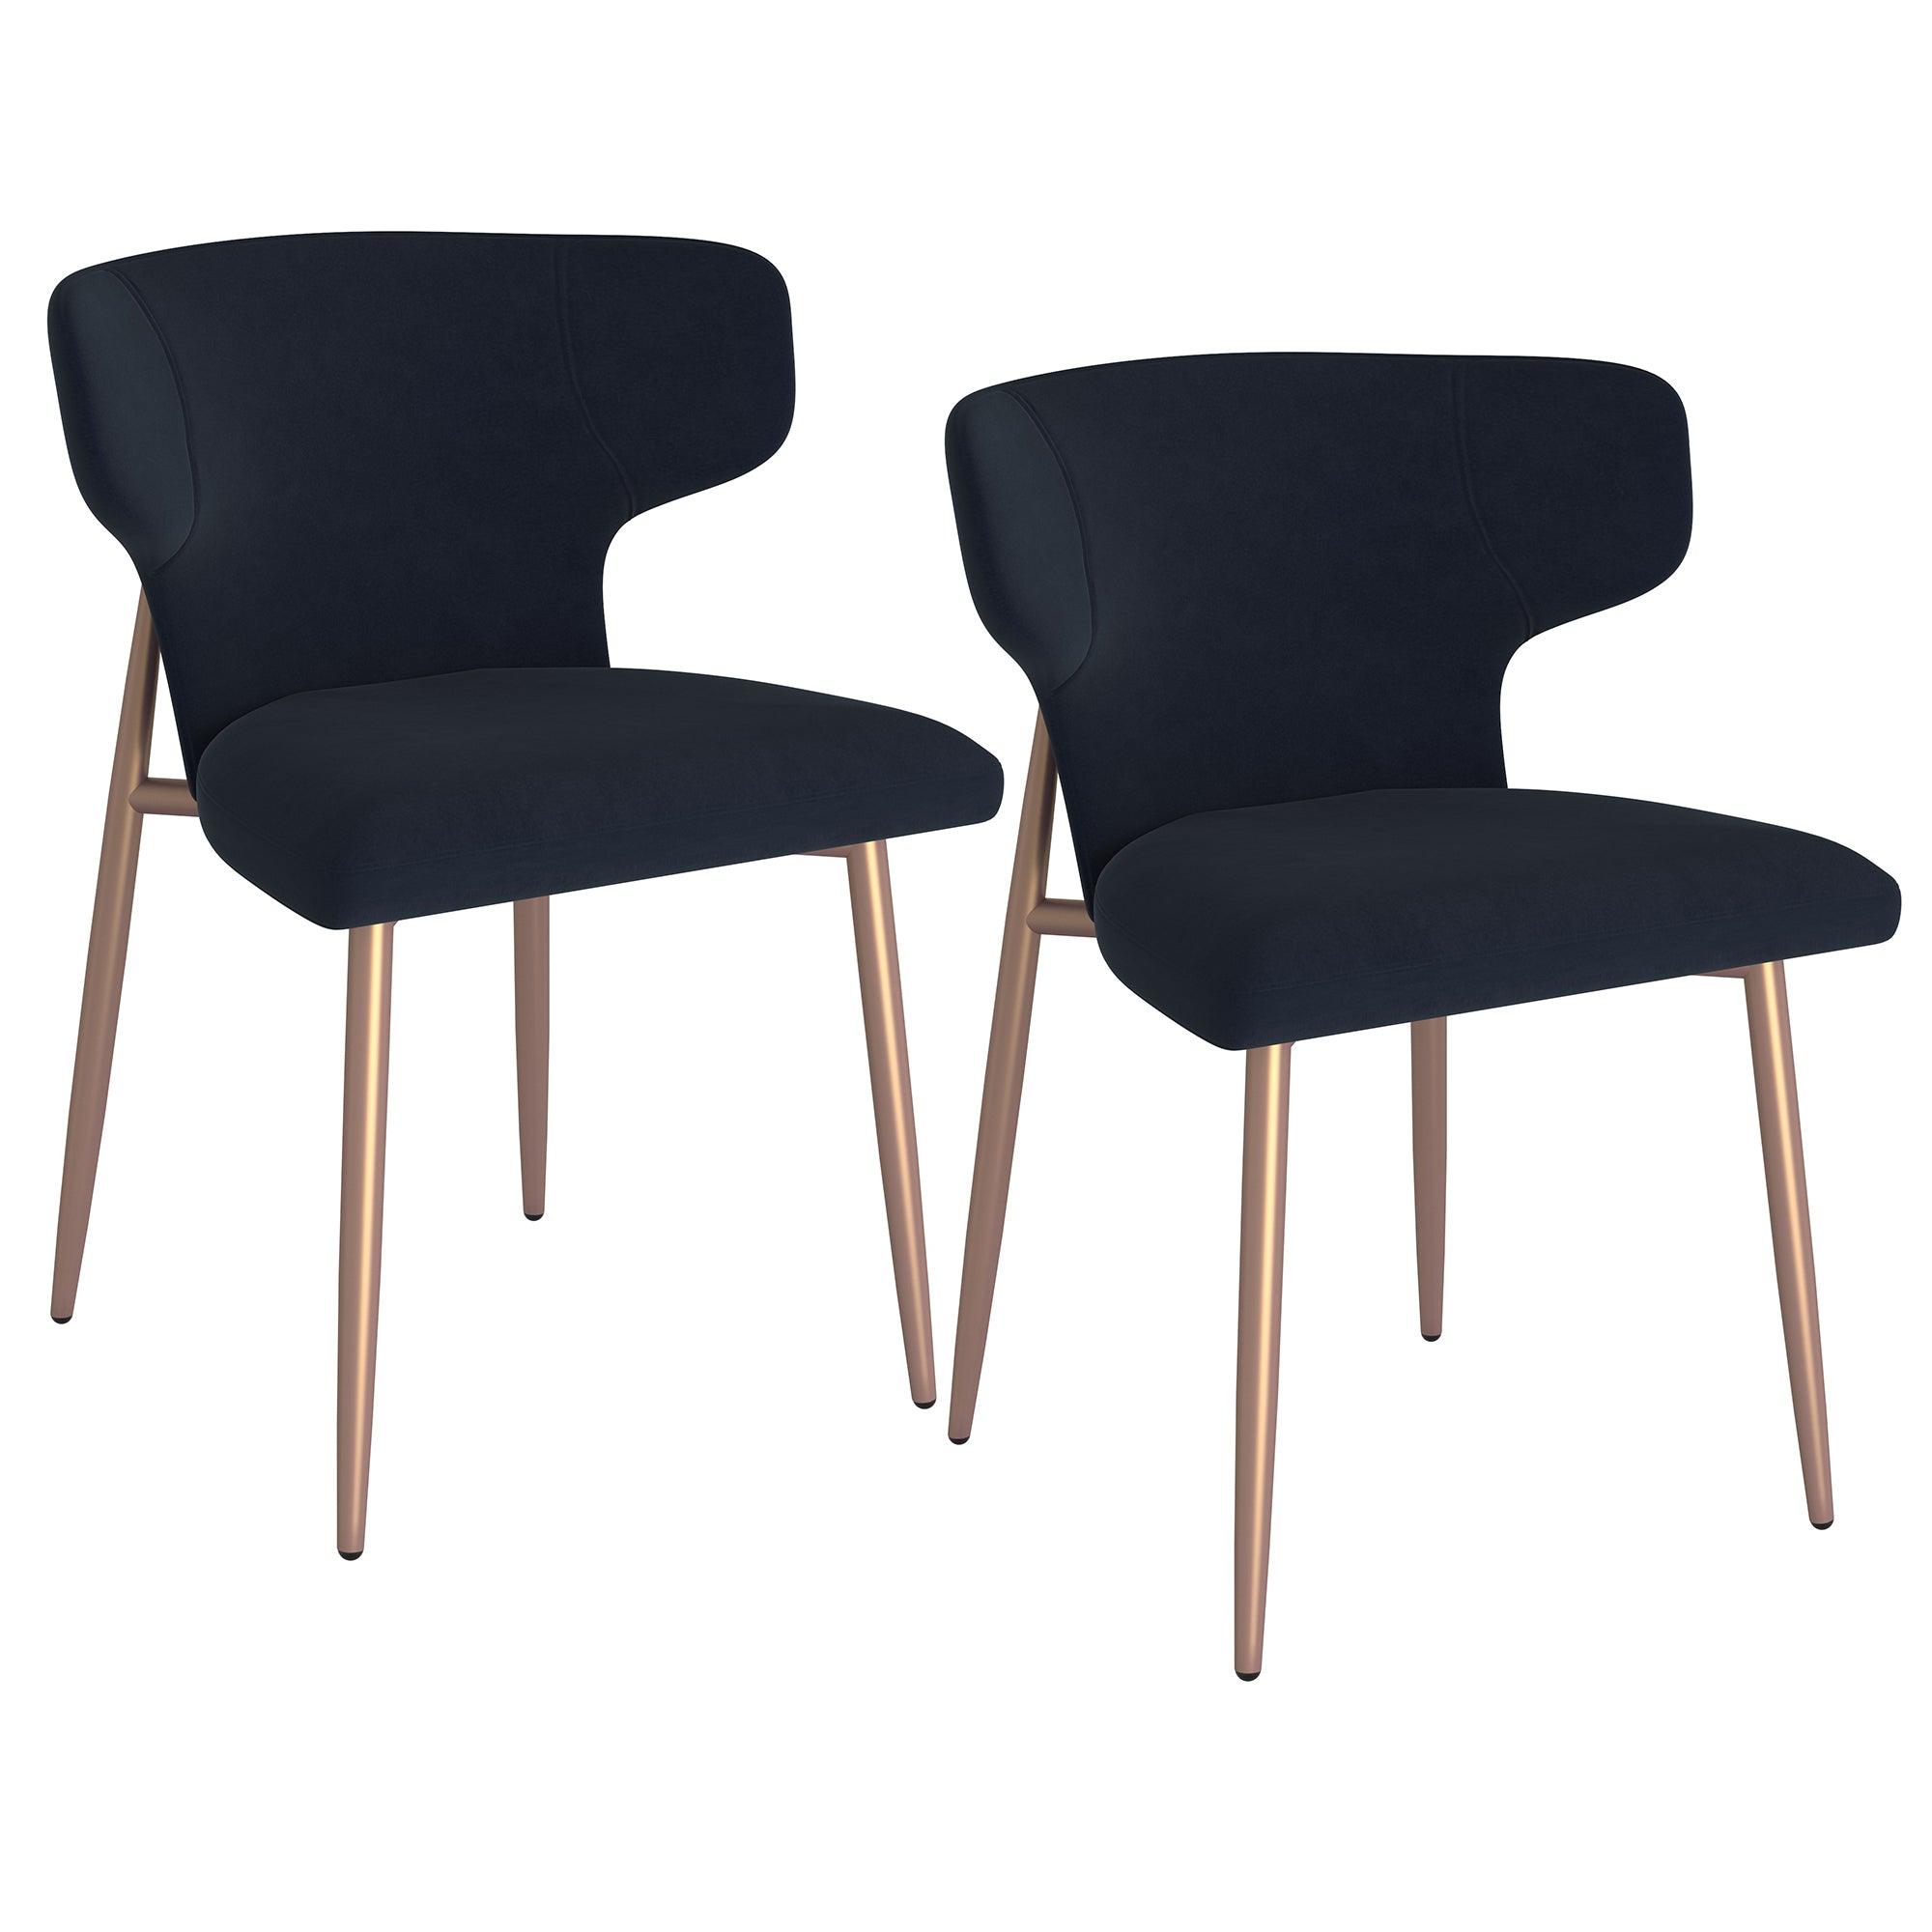 Akira Side Chair, Set of 2 in Black and Aged Gold 202-673BLK